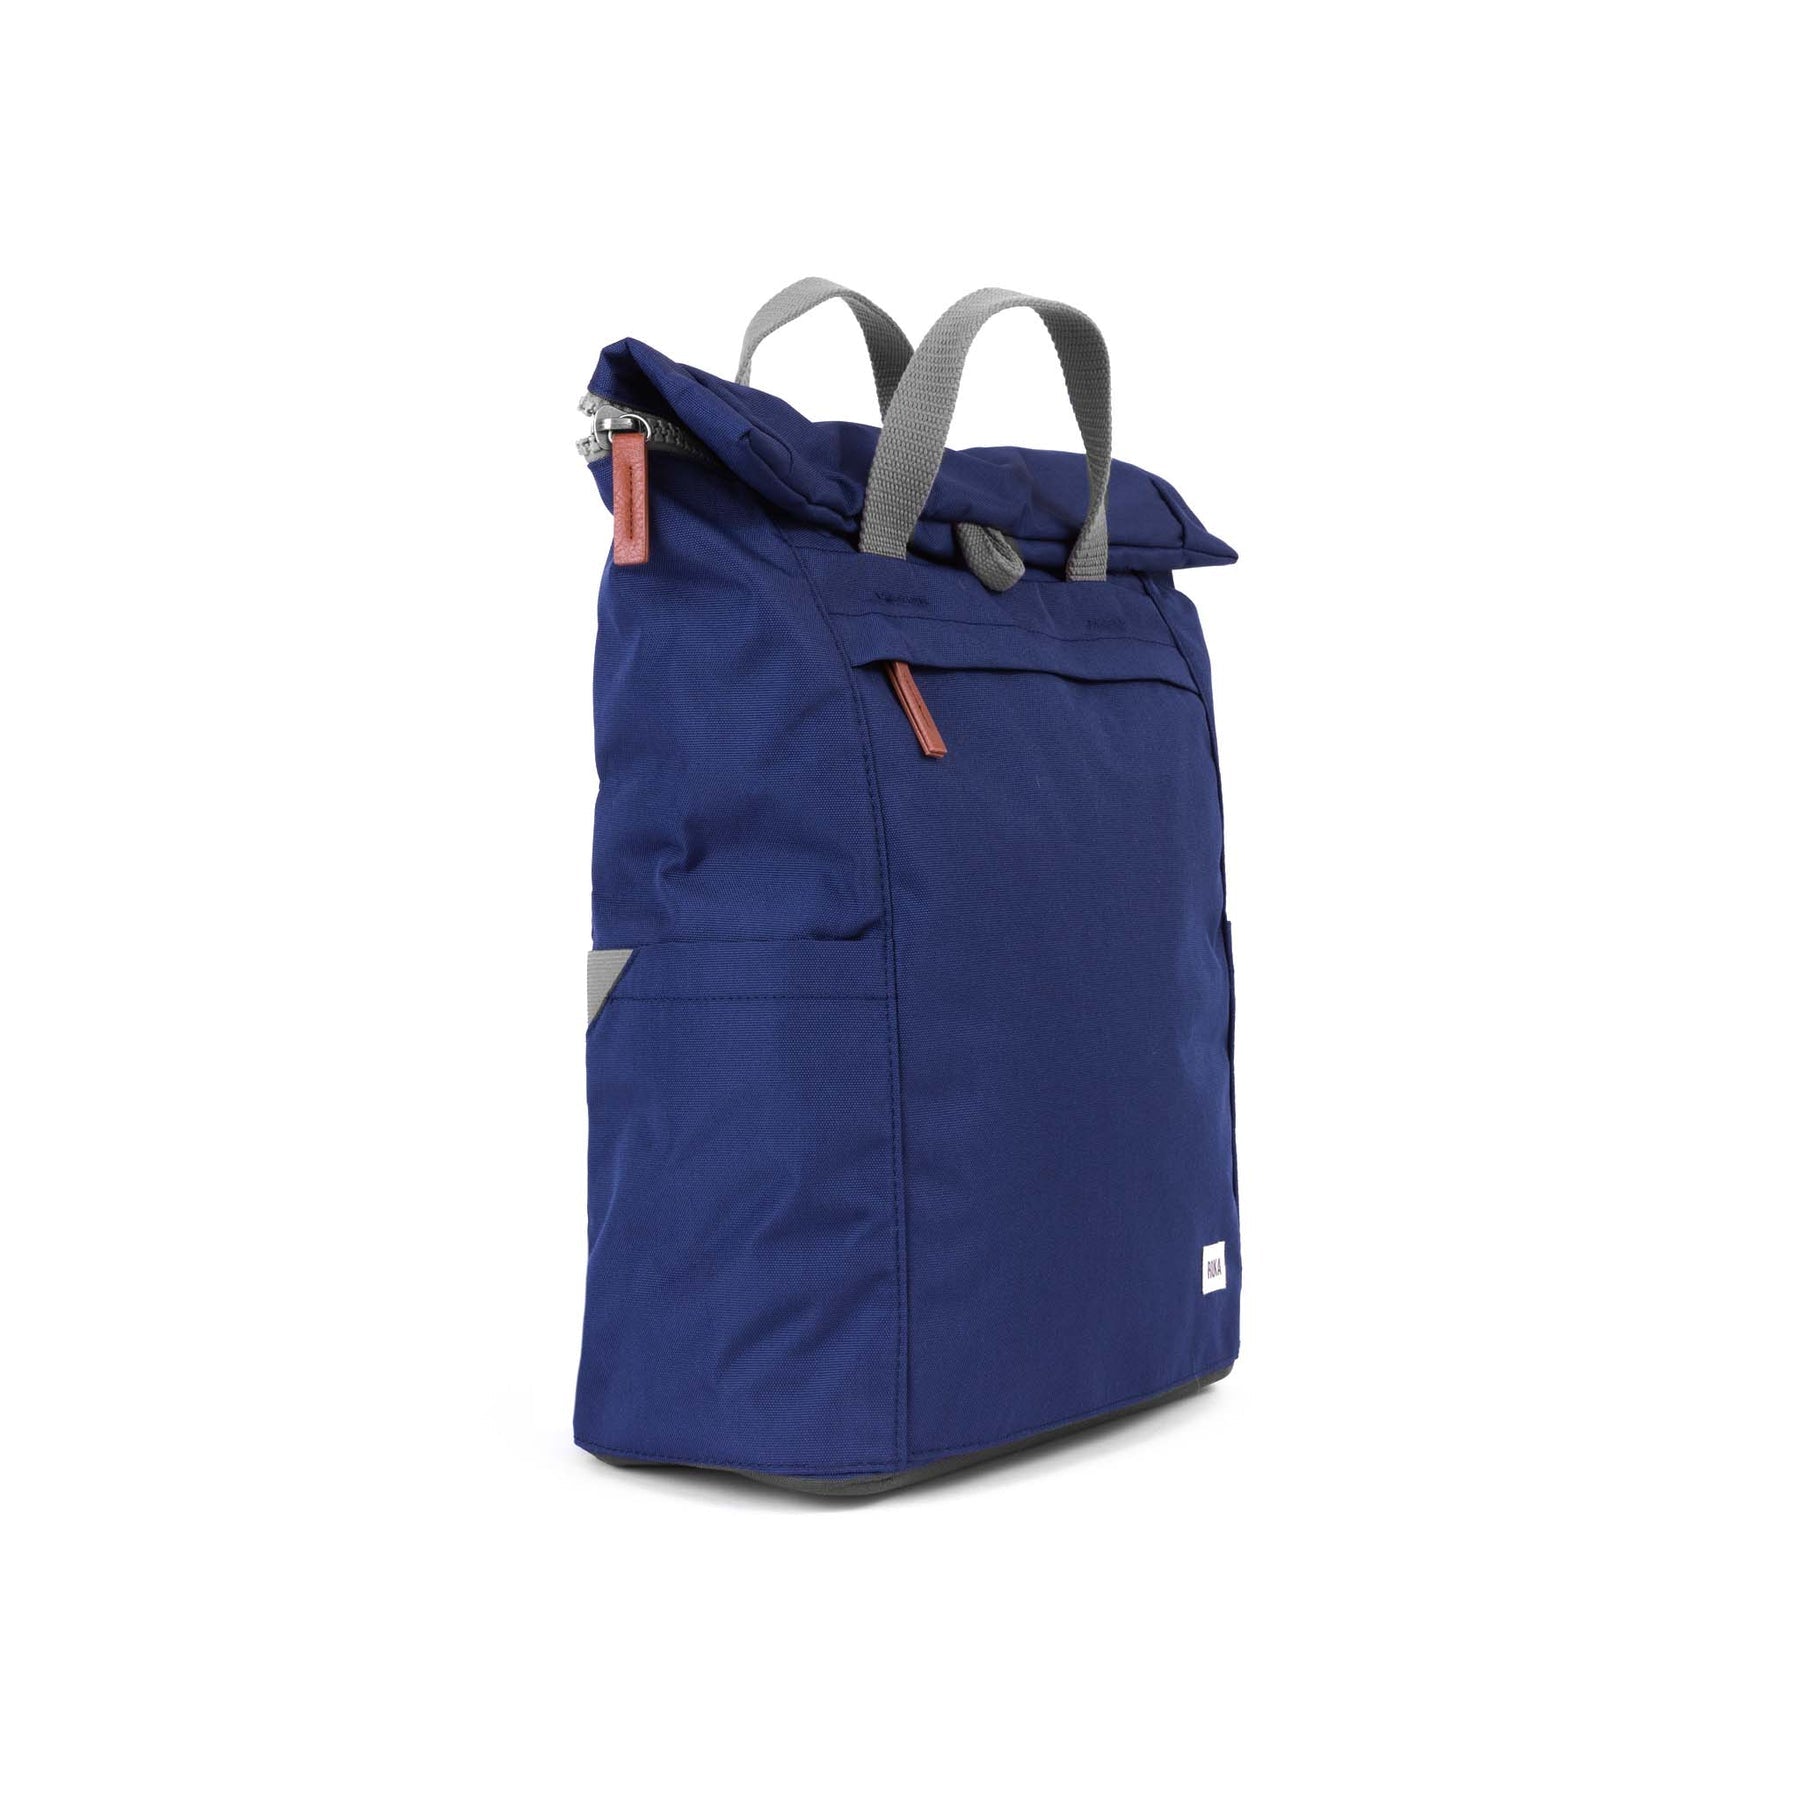 ROKA Finchley A Mineral Large Recycled Canvas Bag - OS